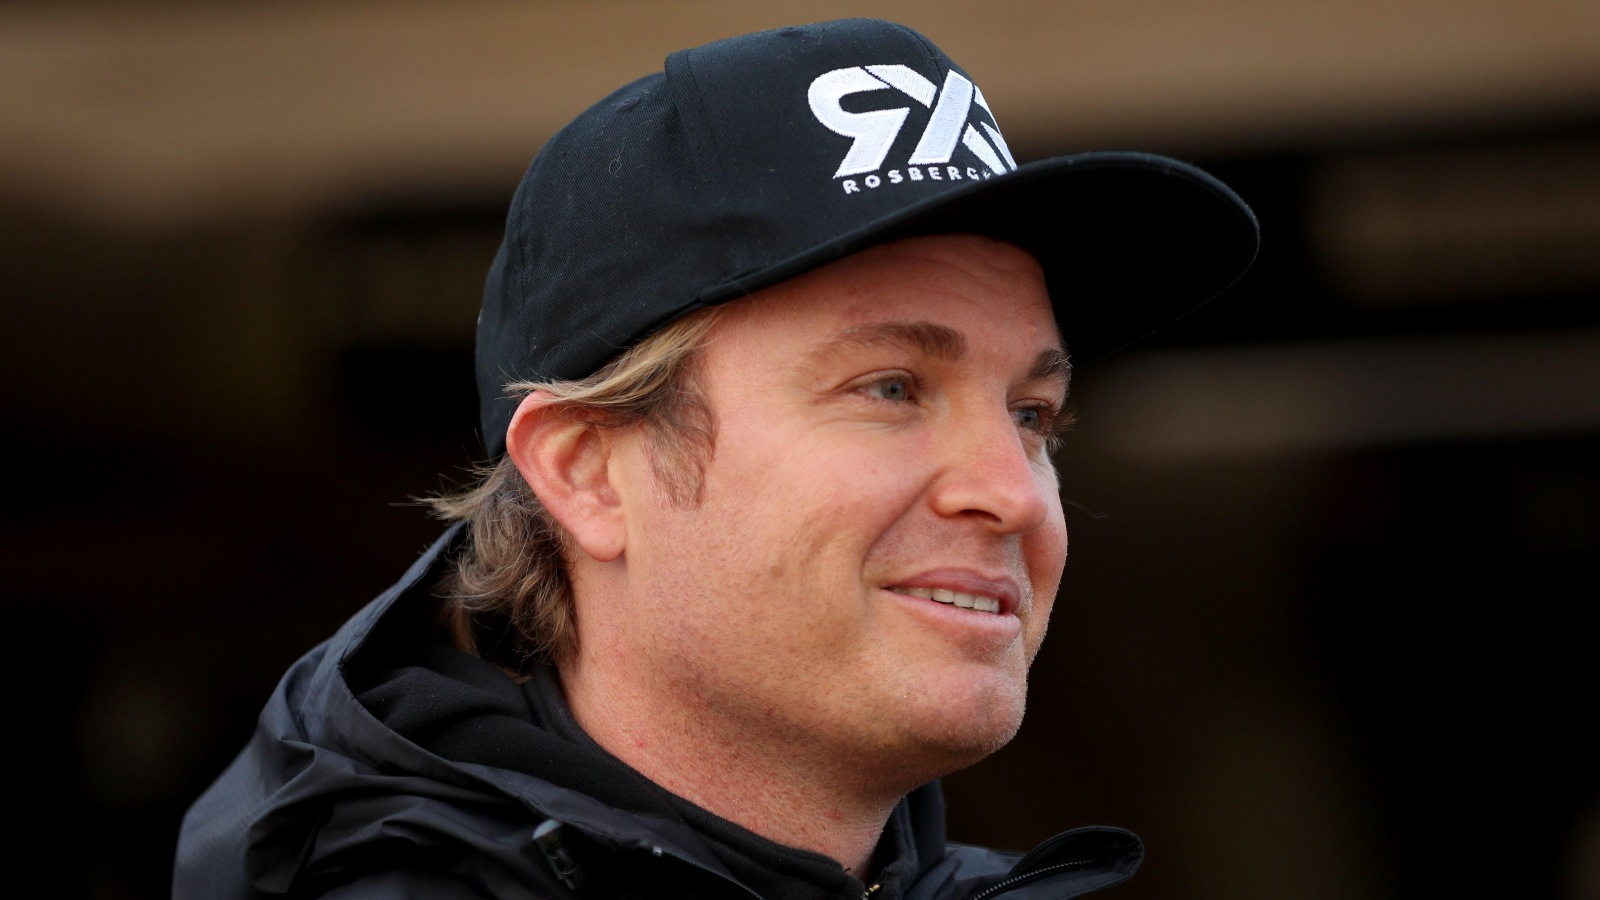 Nico Rosberg wearing a hat and smiling.Dorset, December 2021.